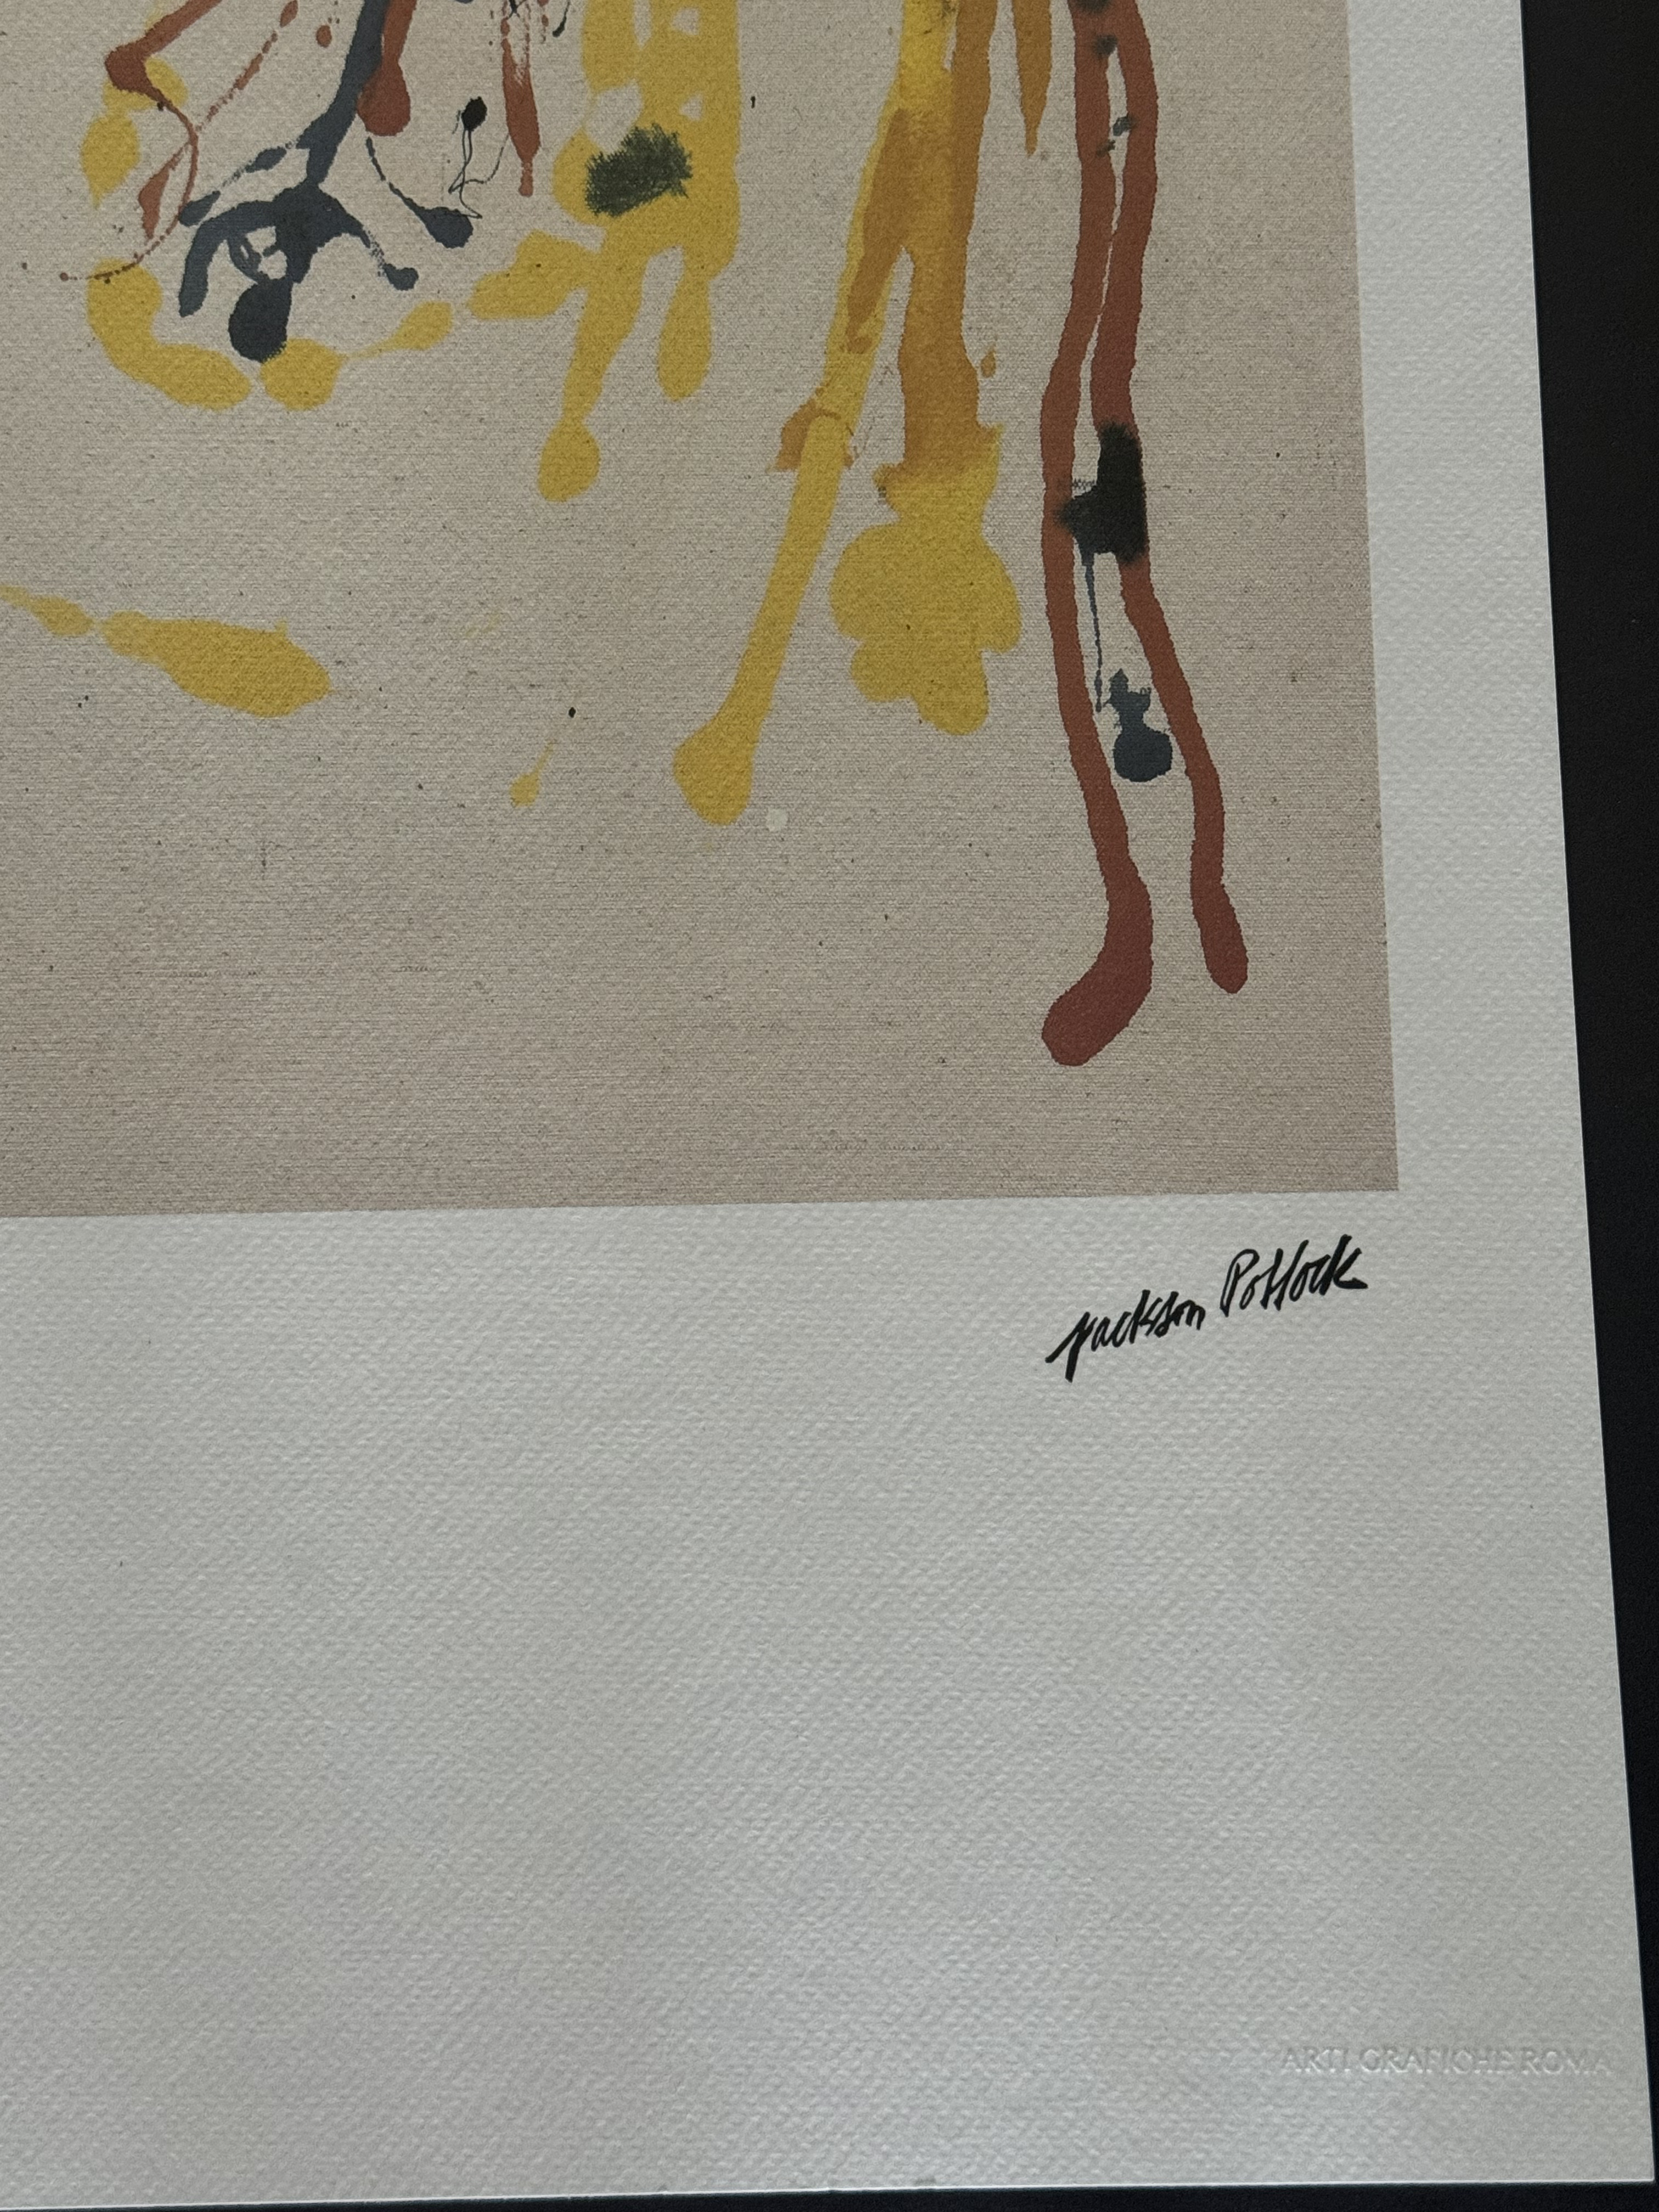 Jackson Pollock offset lithograph plate signed - Image 2 of 5